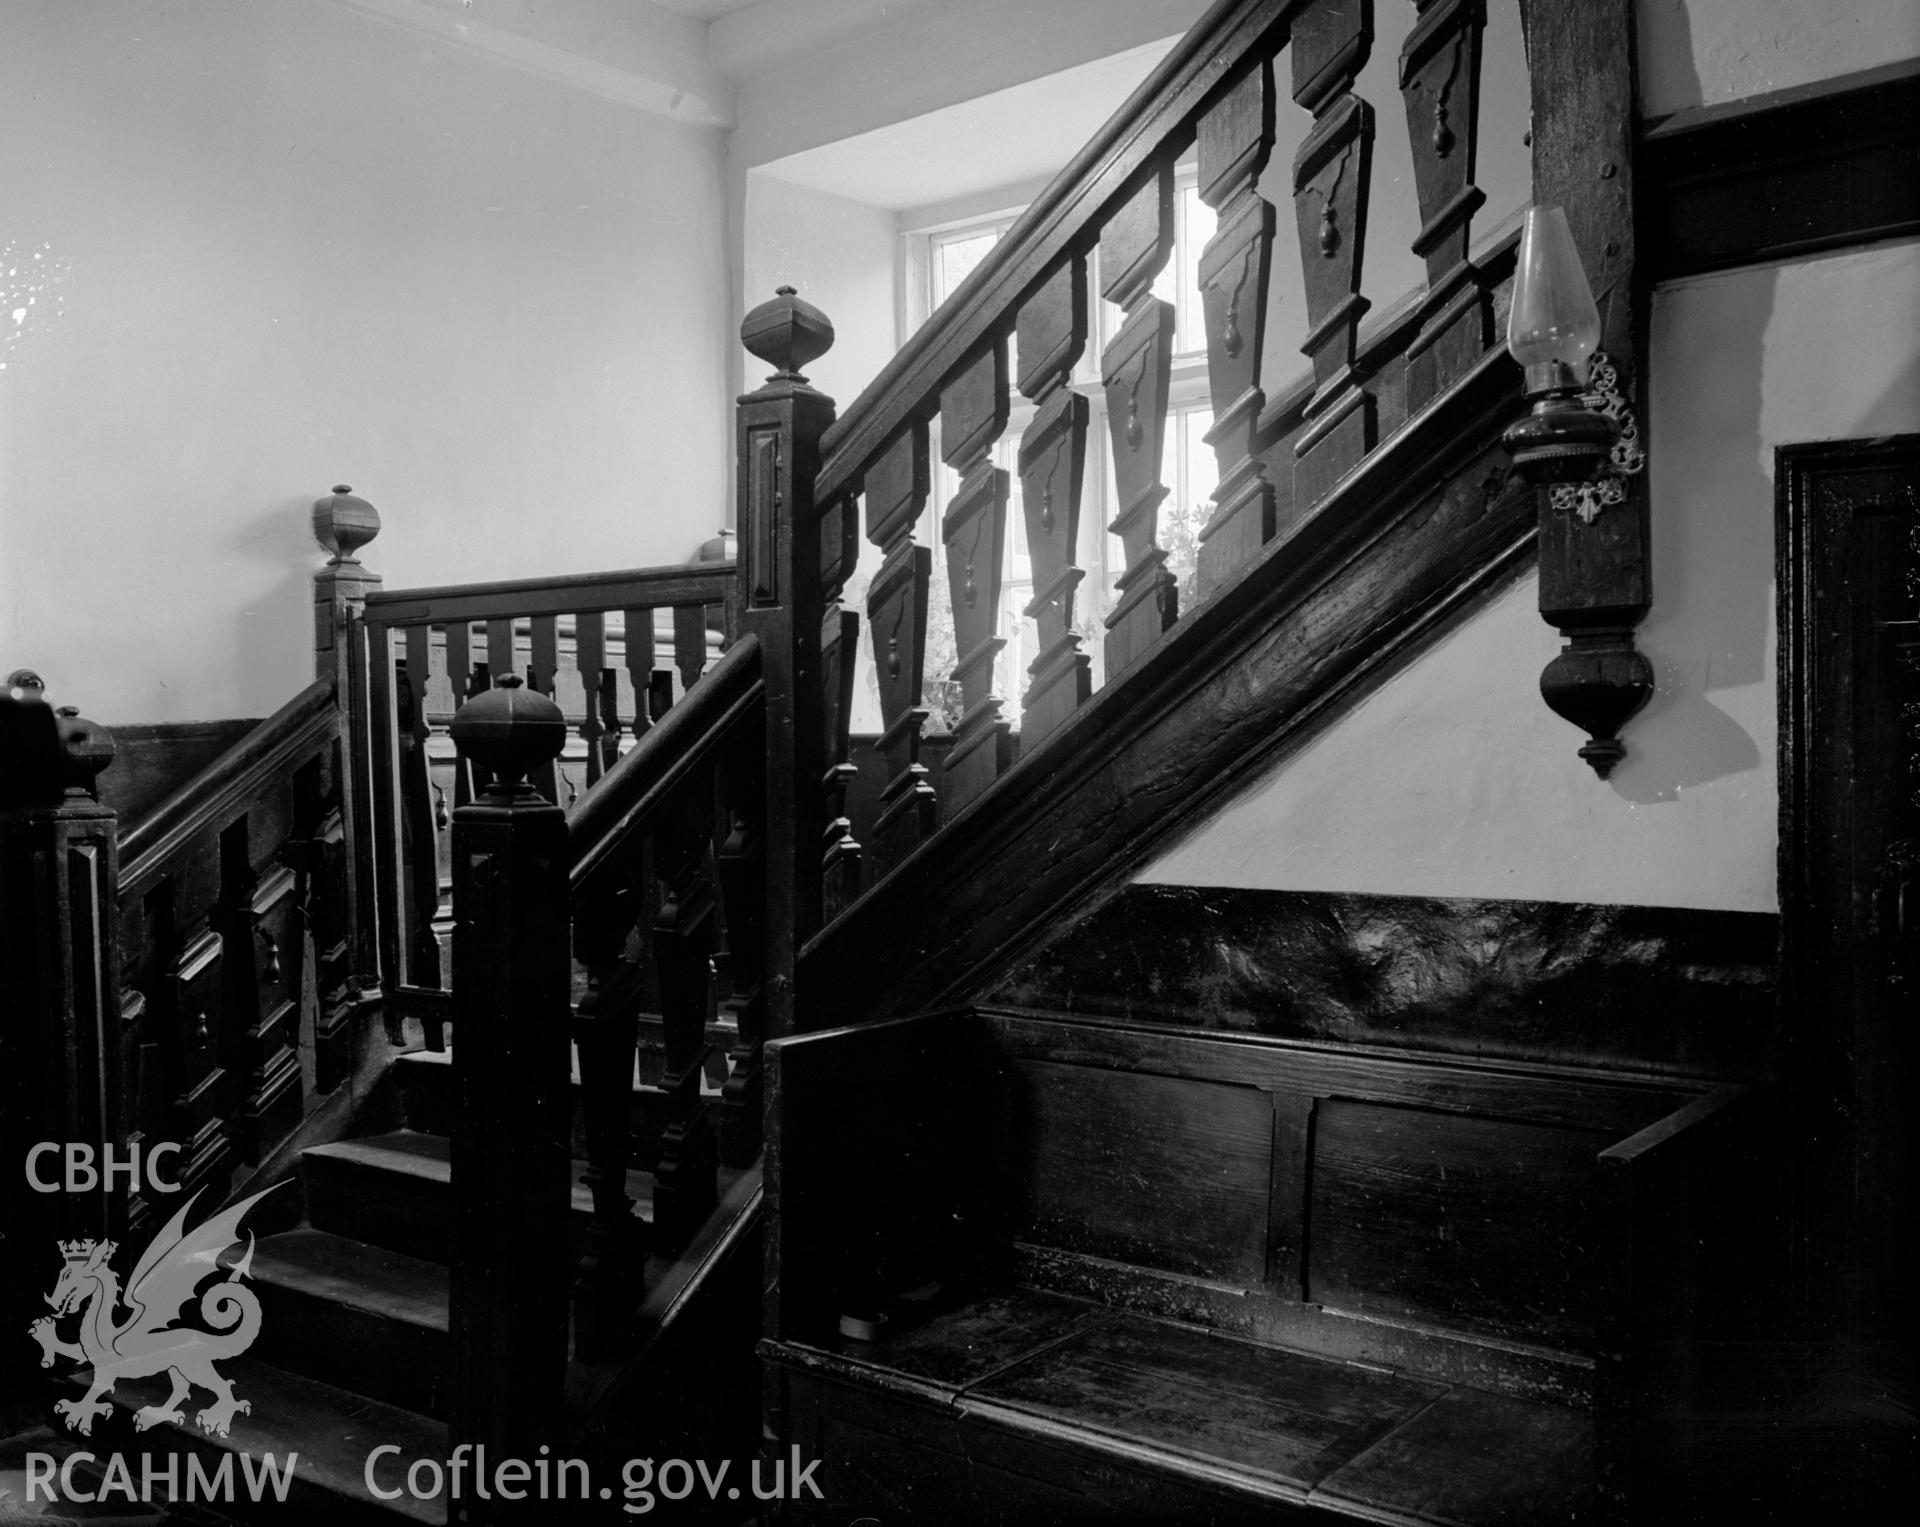 Wooden stair case/banister. A wooden dog gate is situated at the bottom of the stairs.